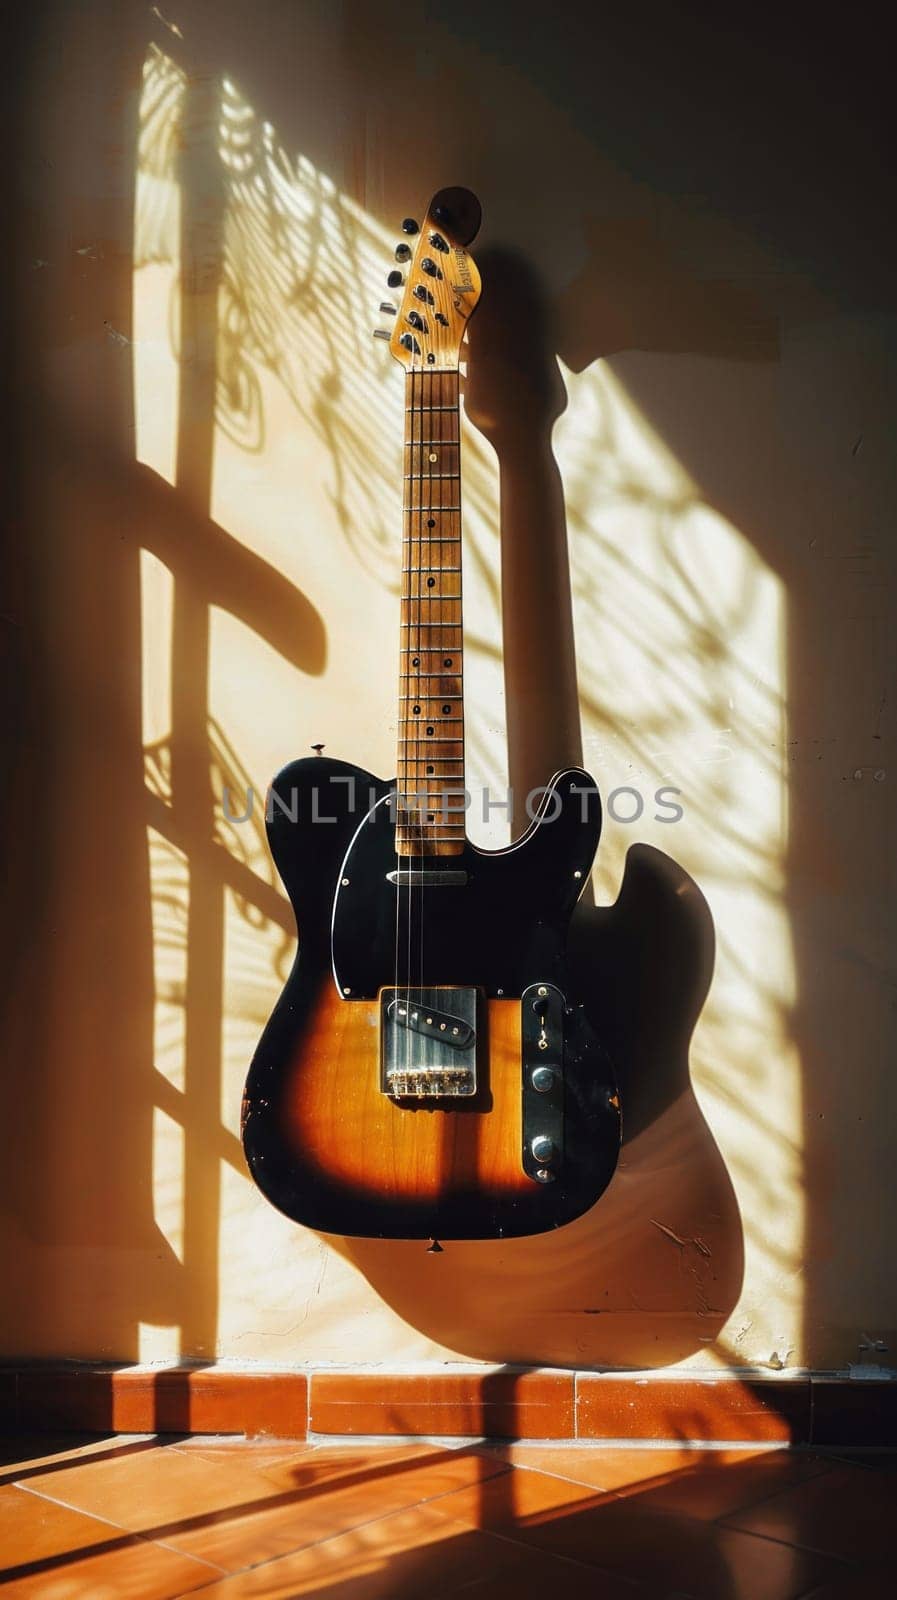 A guitar is hanging on a wall with a shadow of a leafy plant behind it.